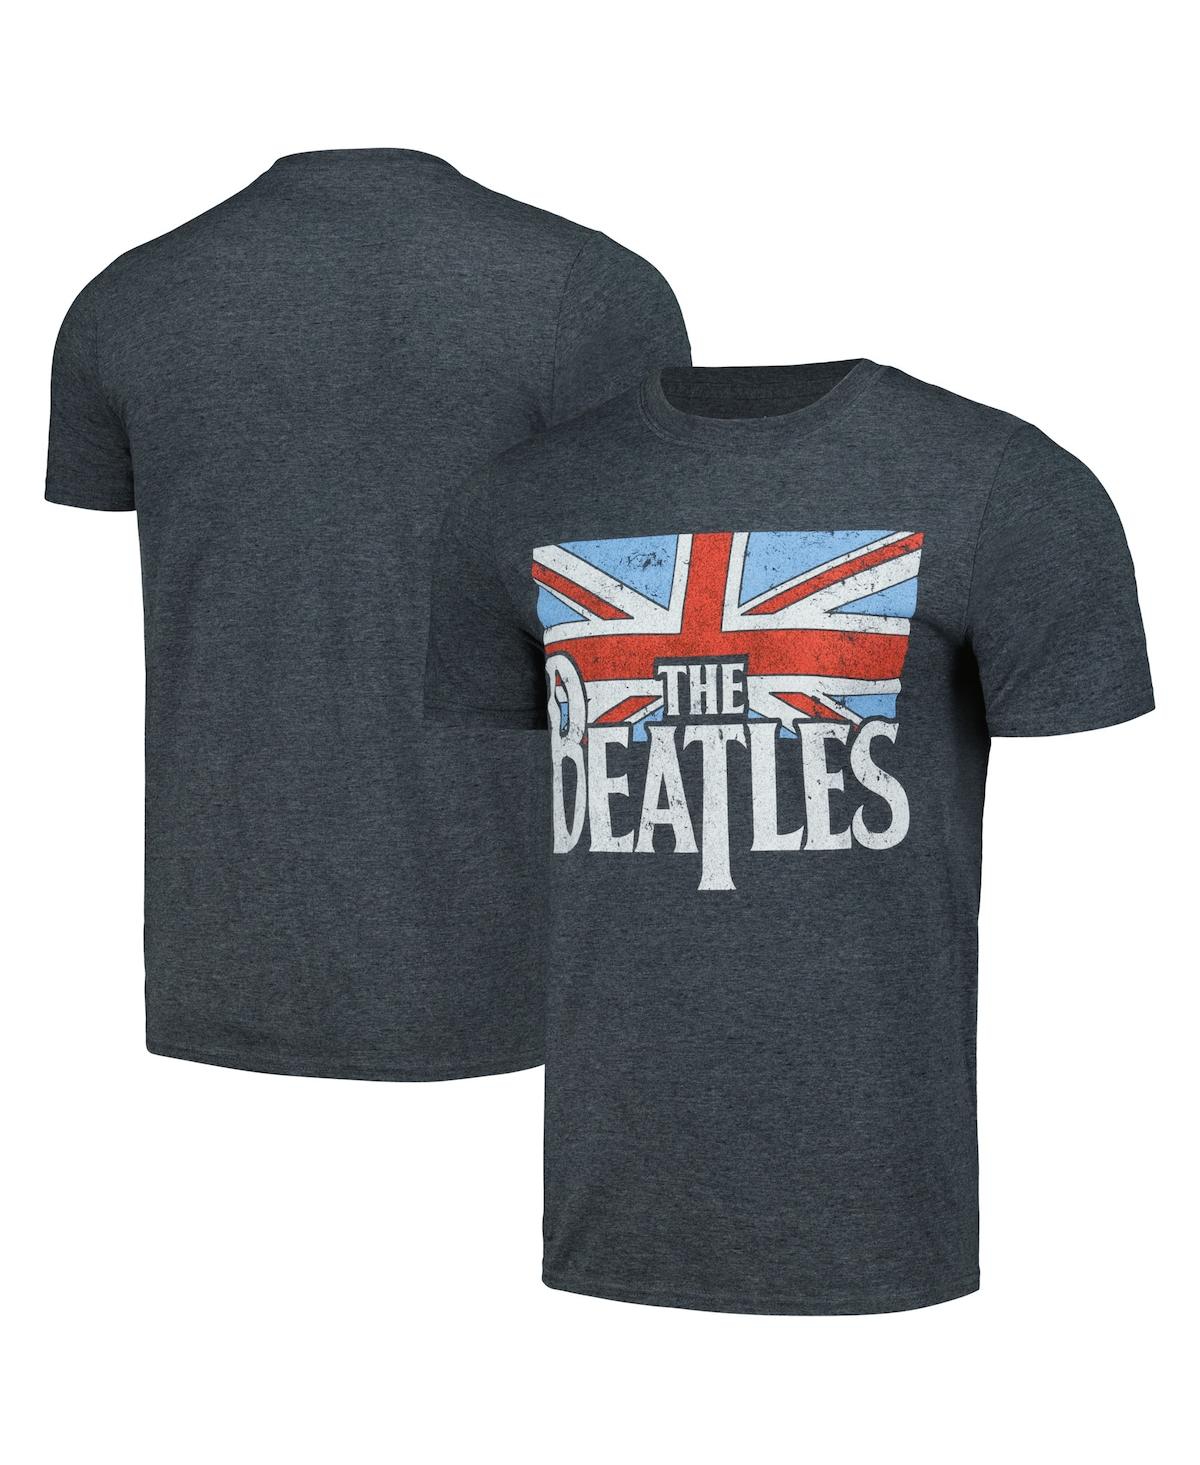 Men's and Women's Gray The Beatles Distressed British Flag T-shirt - Gray